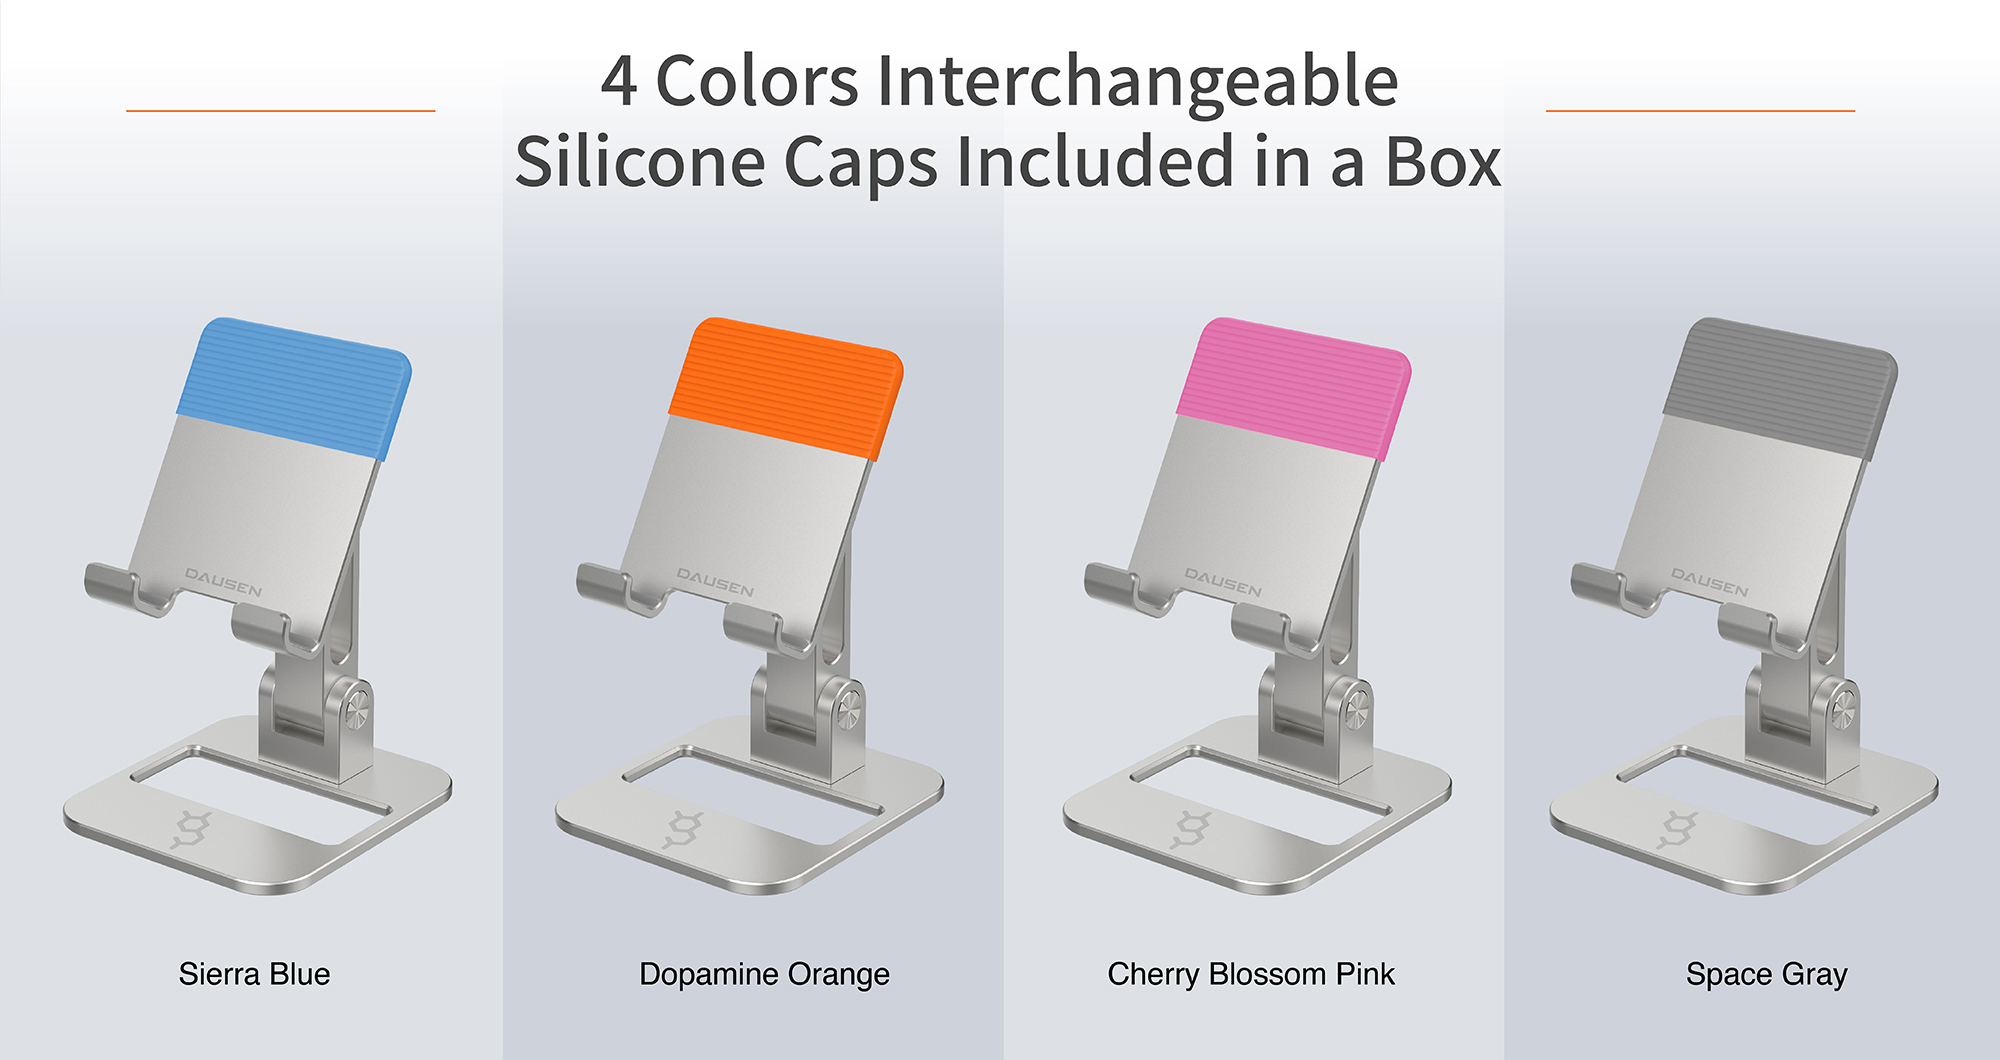 4 Colors Interchangeable Silicone Caps Included in a Box